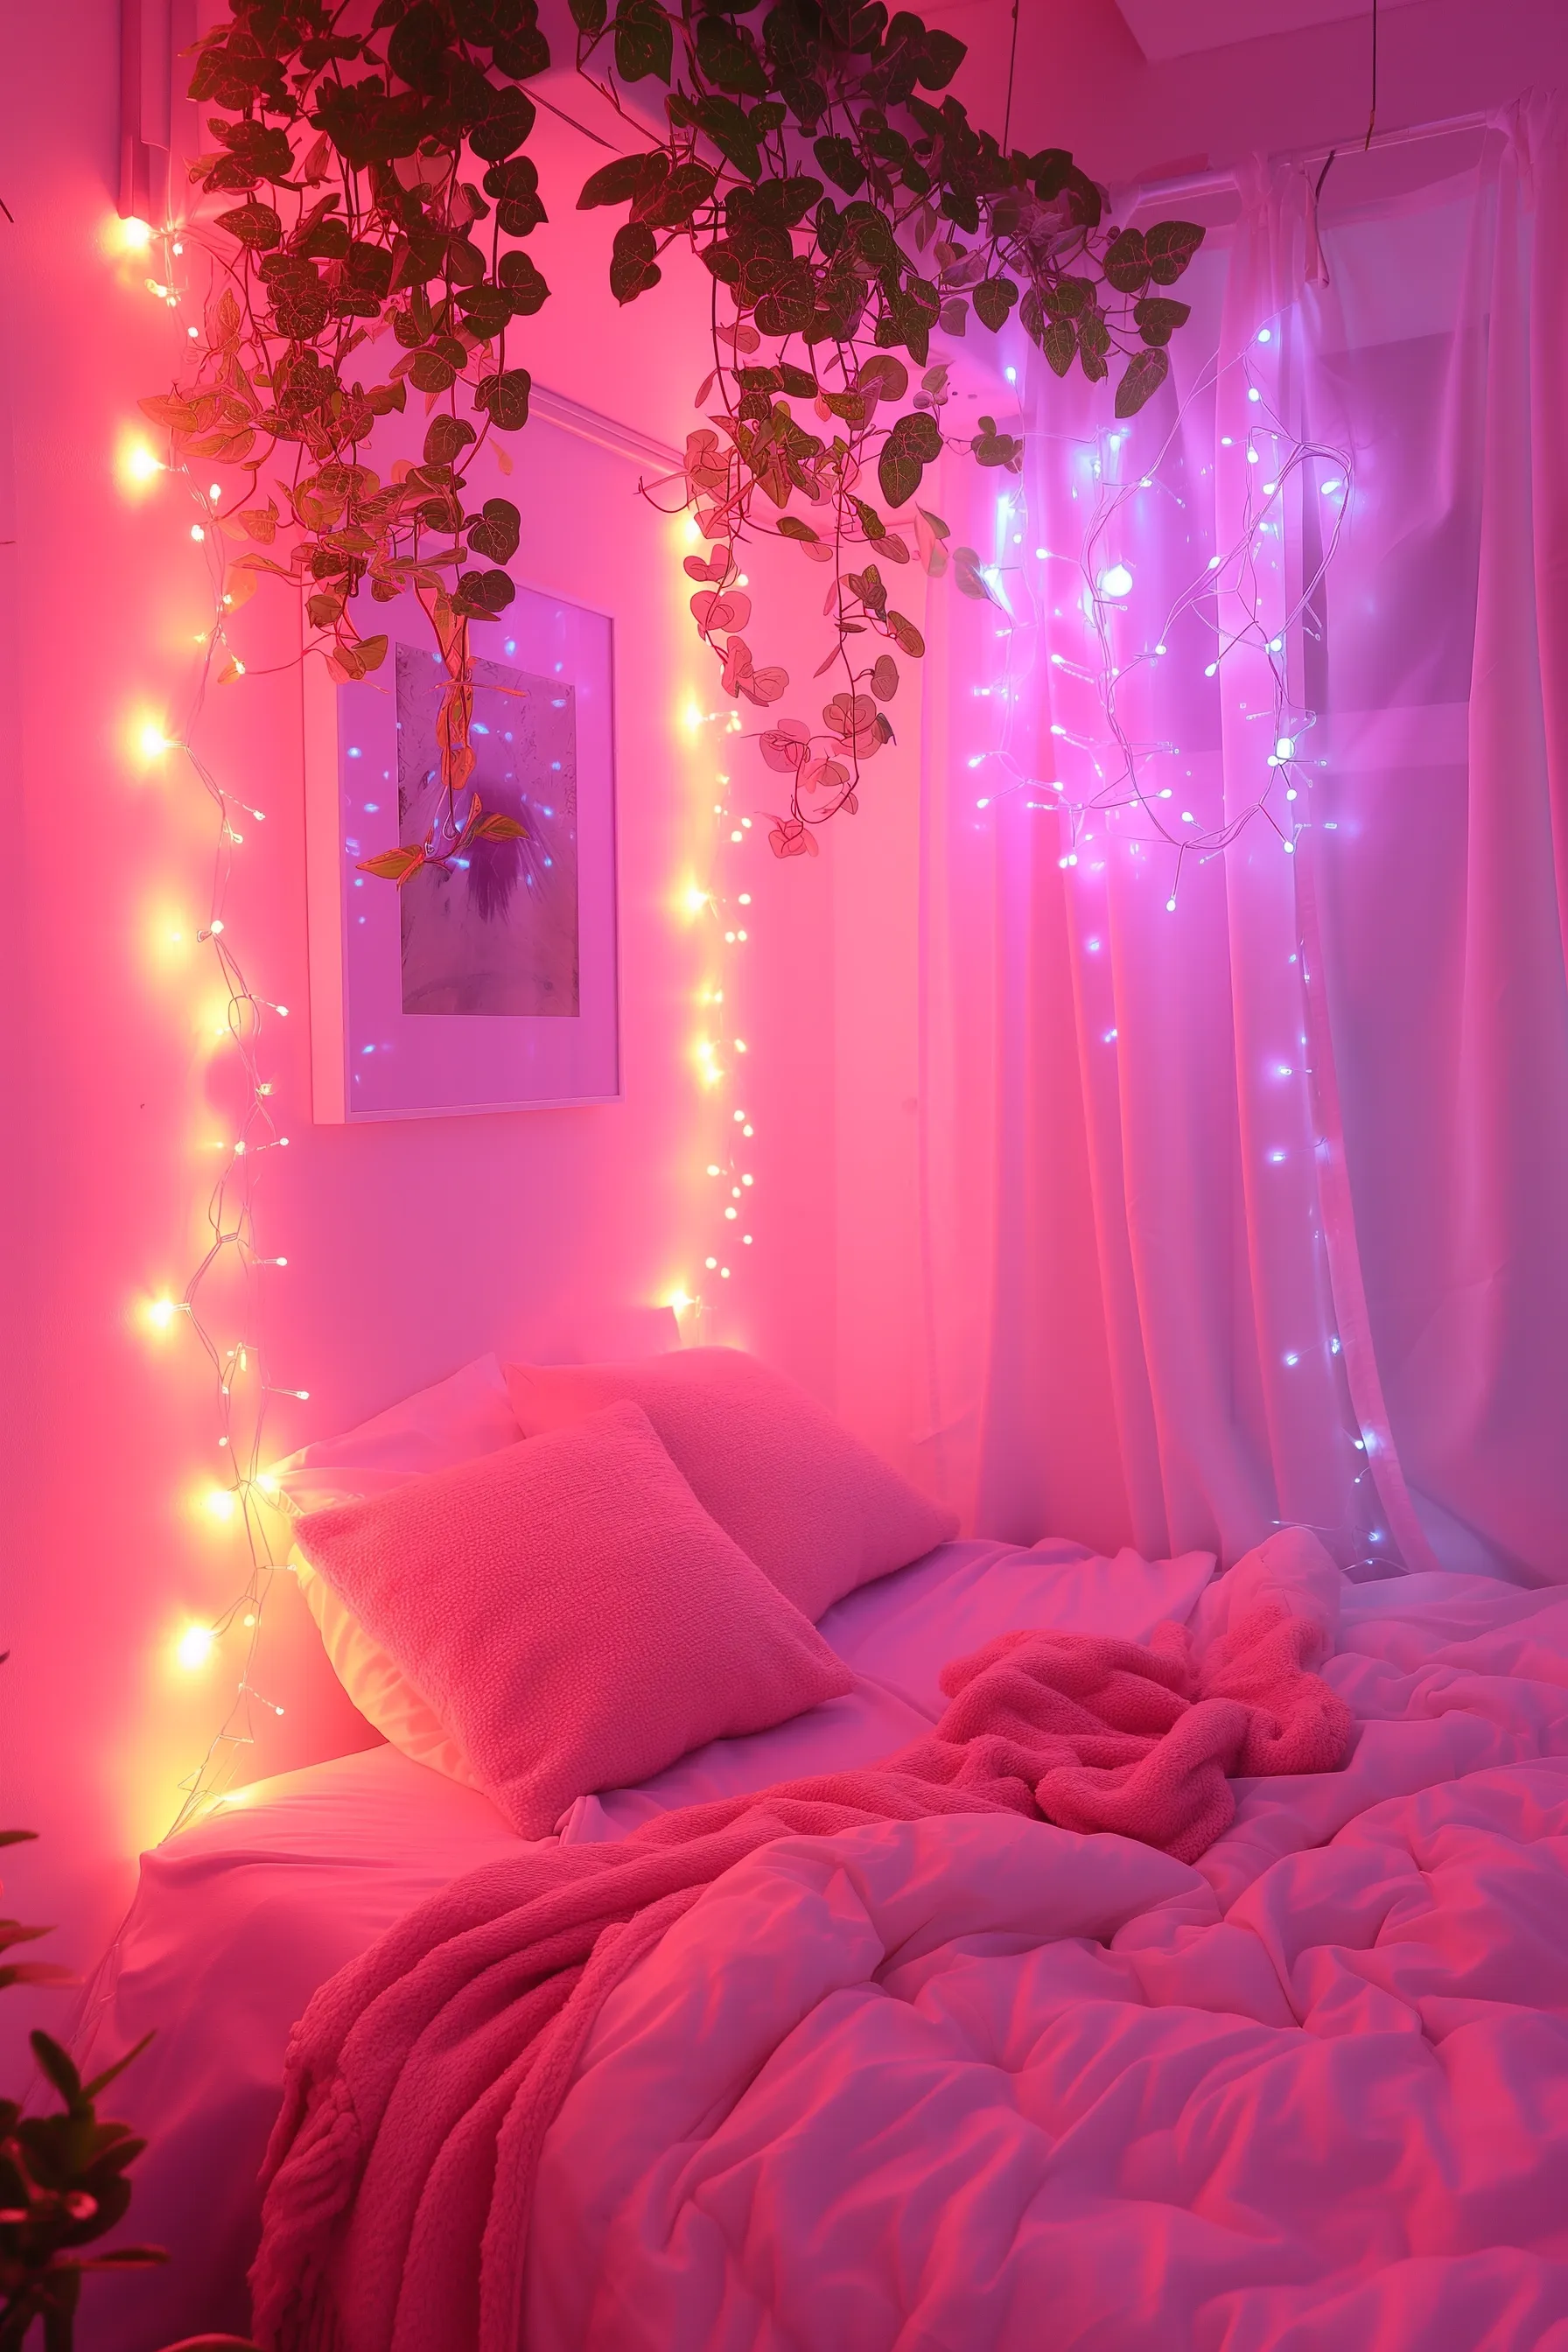 A bed with fairy lights draped around it.and ivy plants